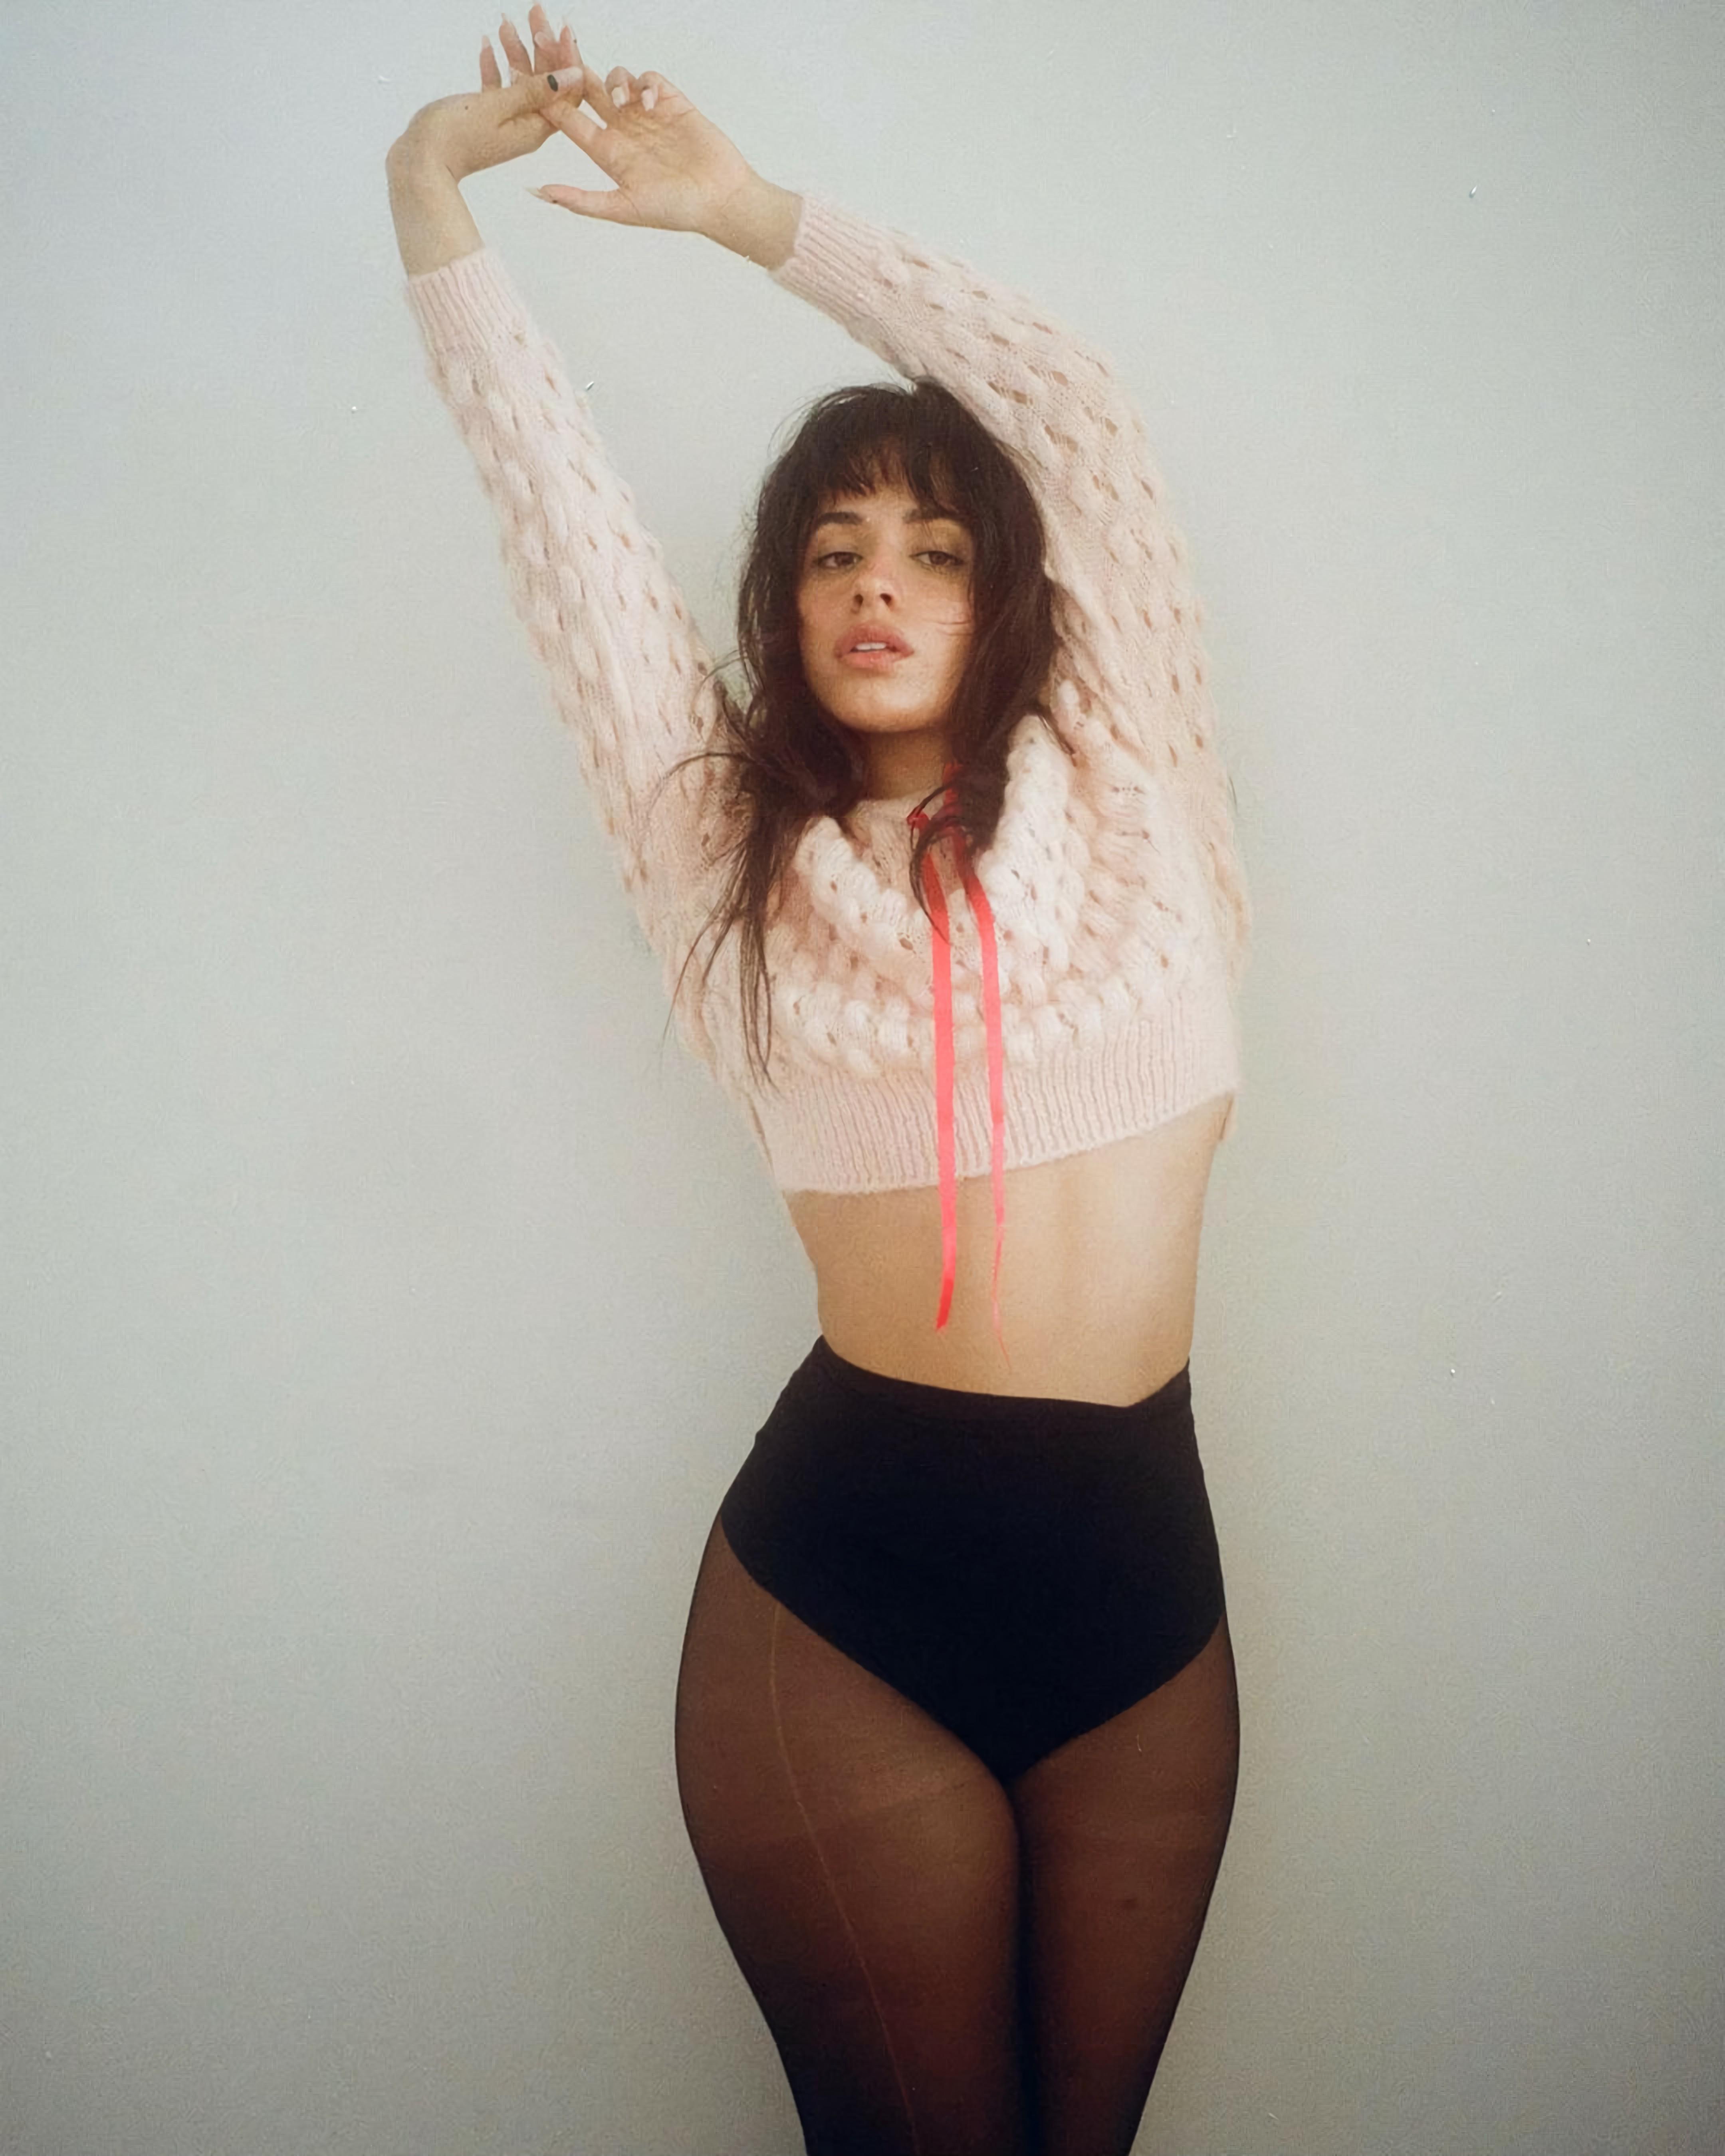 Photos n°2 : Camila Cabello Shows Off in a Crop Top and Stockings!